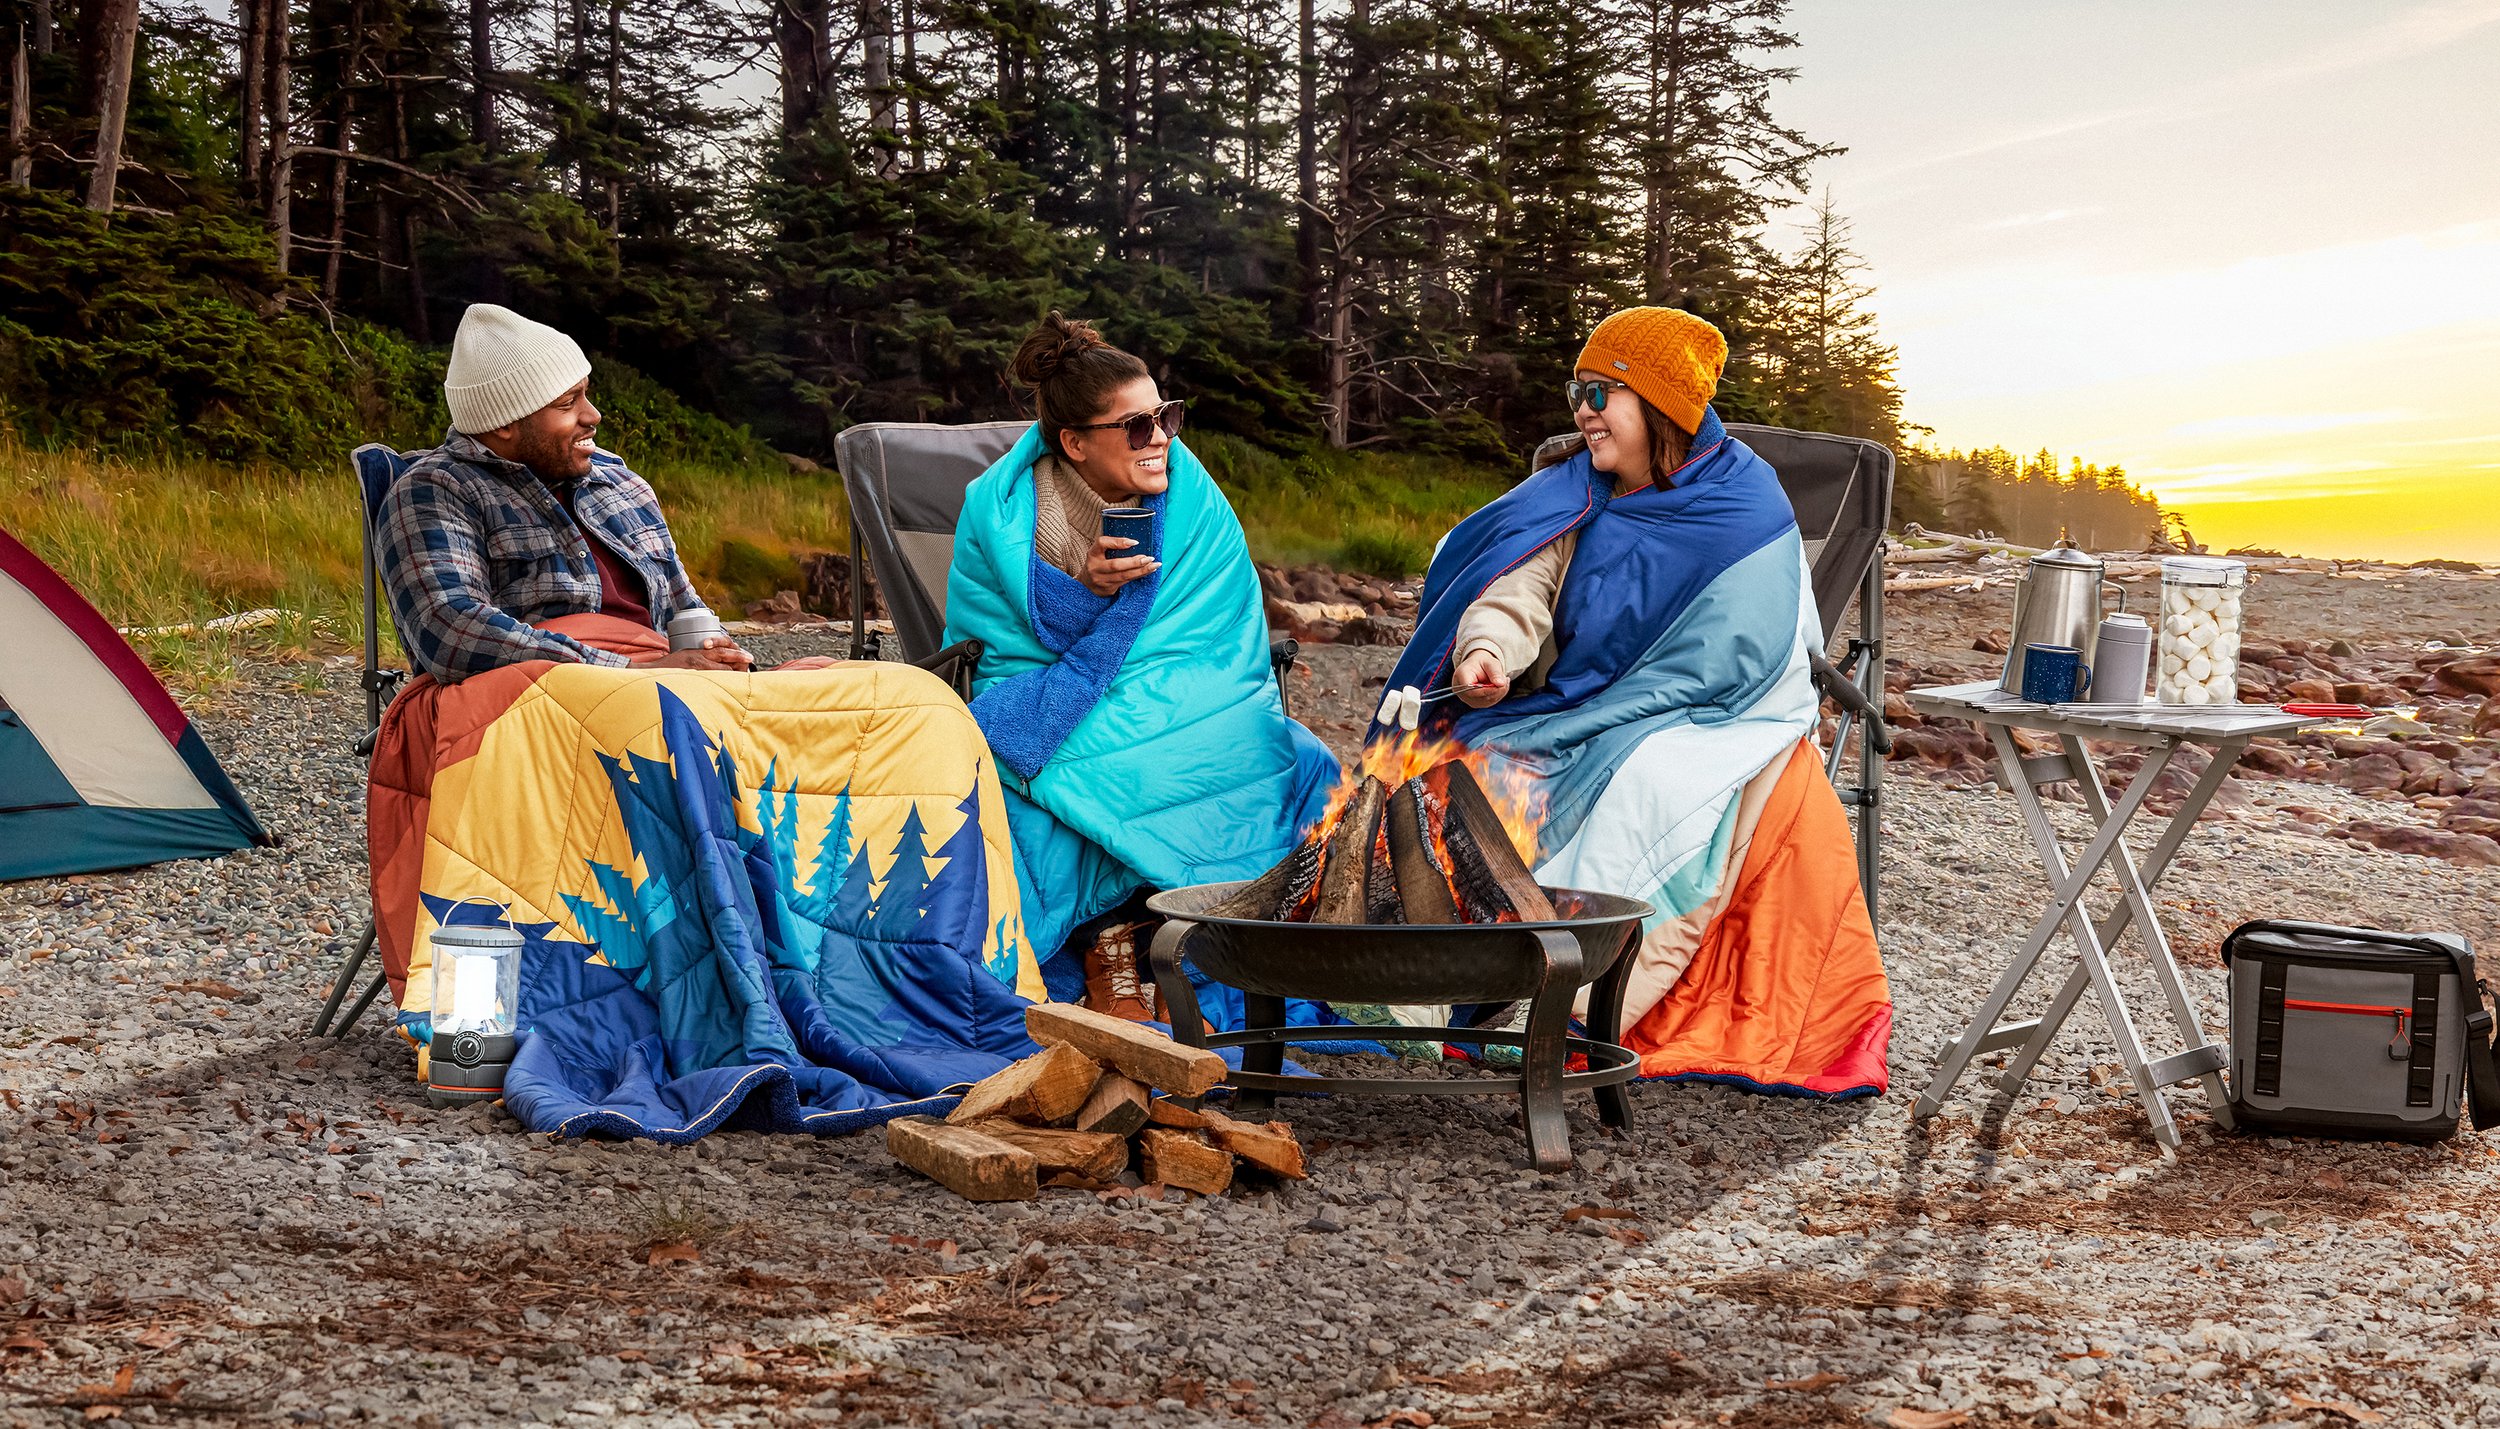 MM_Lifestyle_Camping_Blanket_with_3 Adults-1.jpg